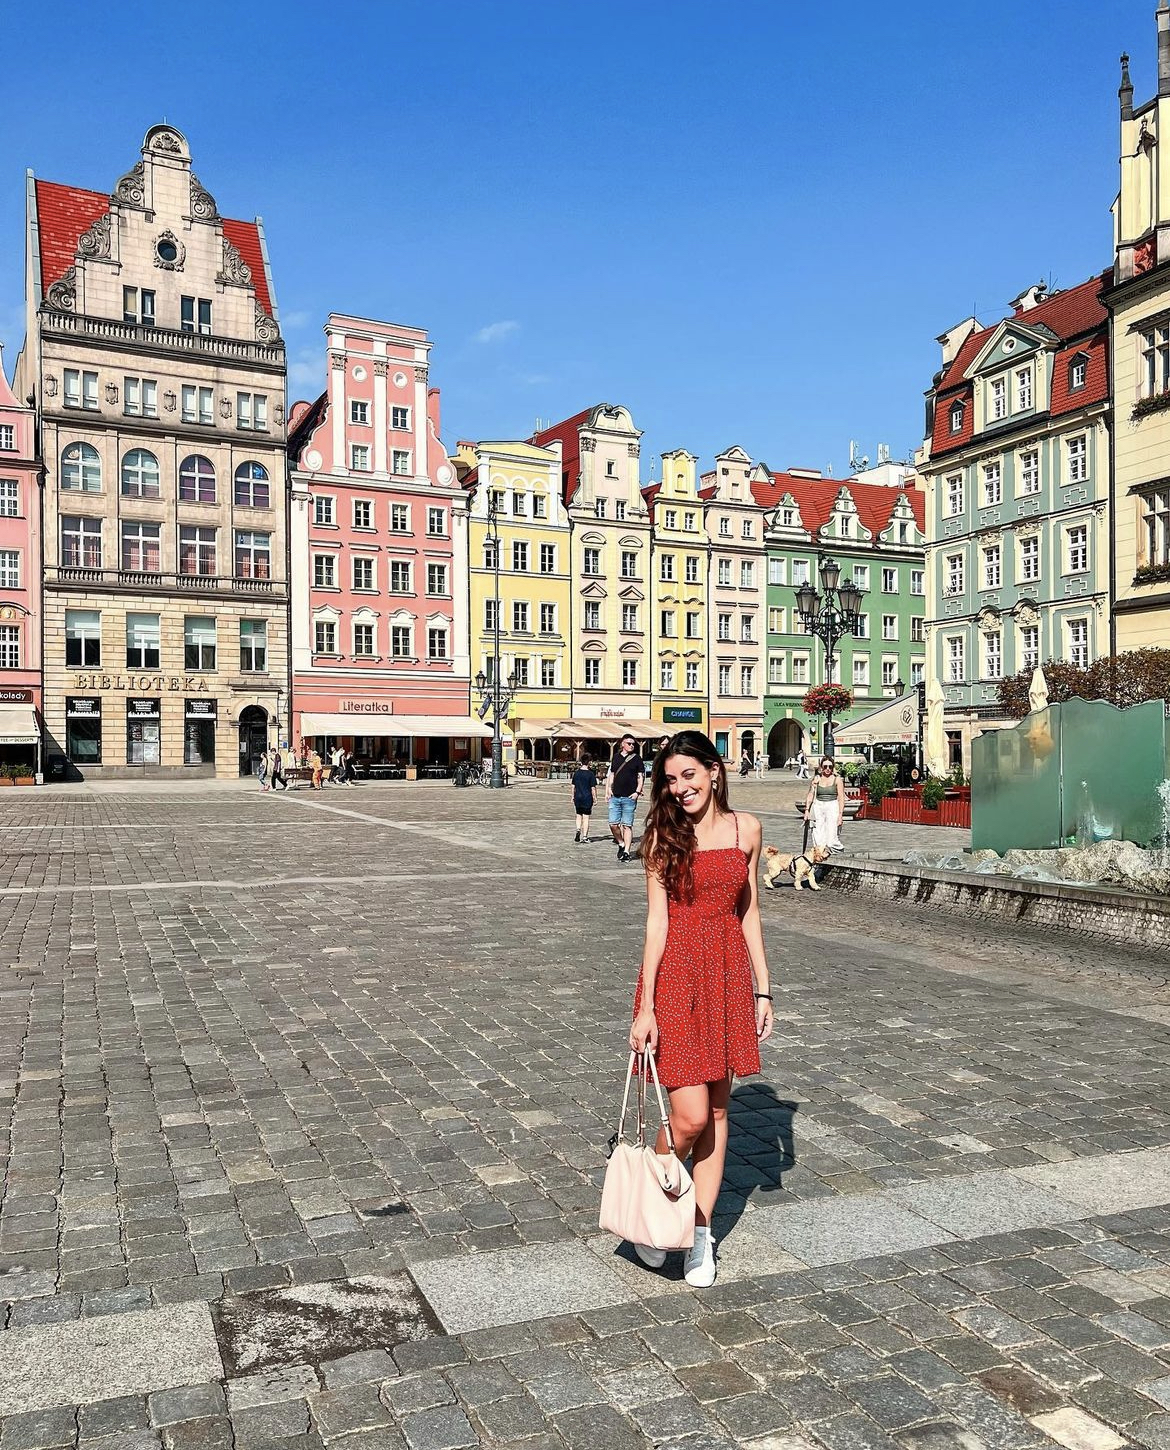 Wroclaw Old Town in Lower Silesia- a fairytale destination in Europe